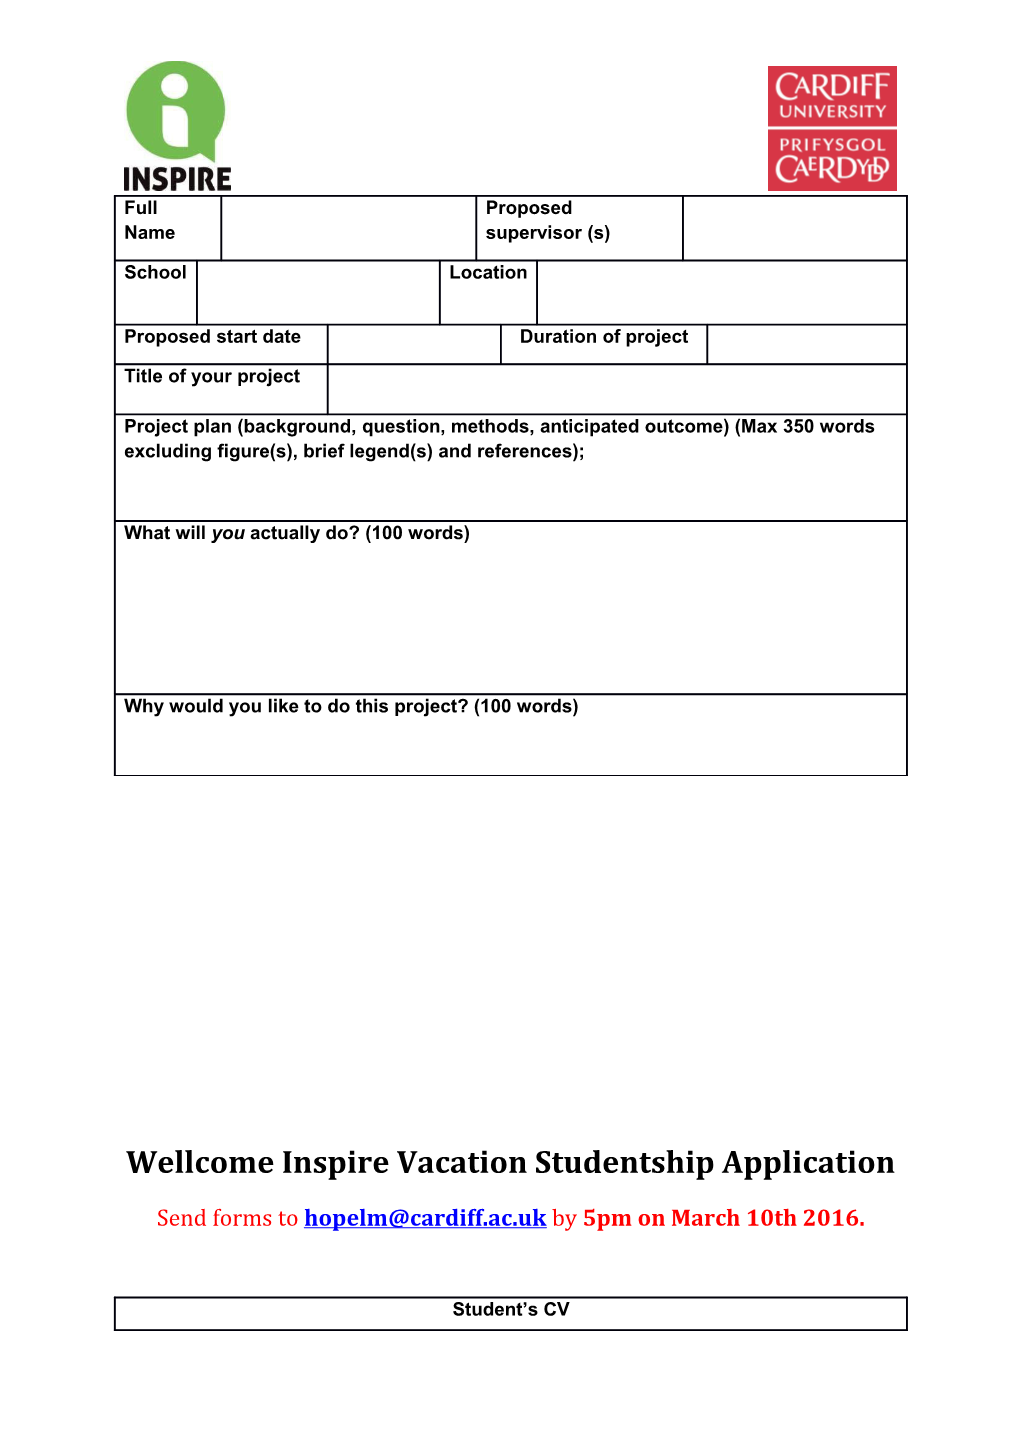 Wellcome Inspire Vacation Studentship Application